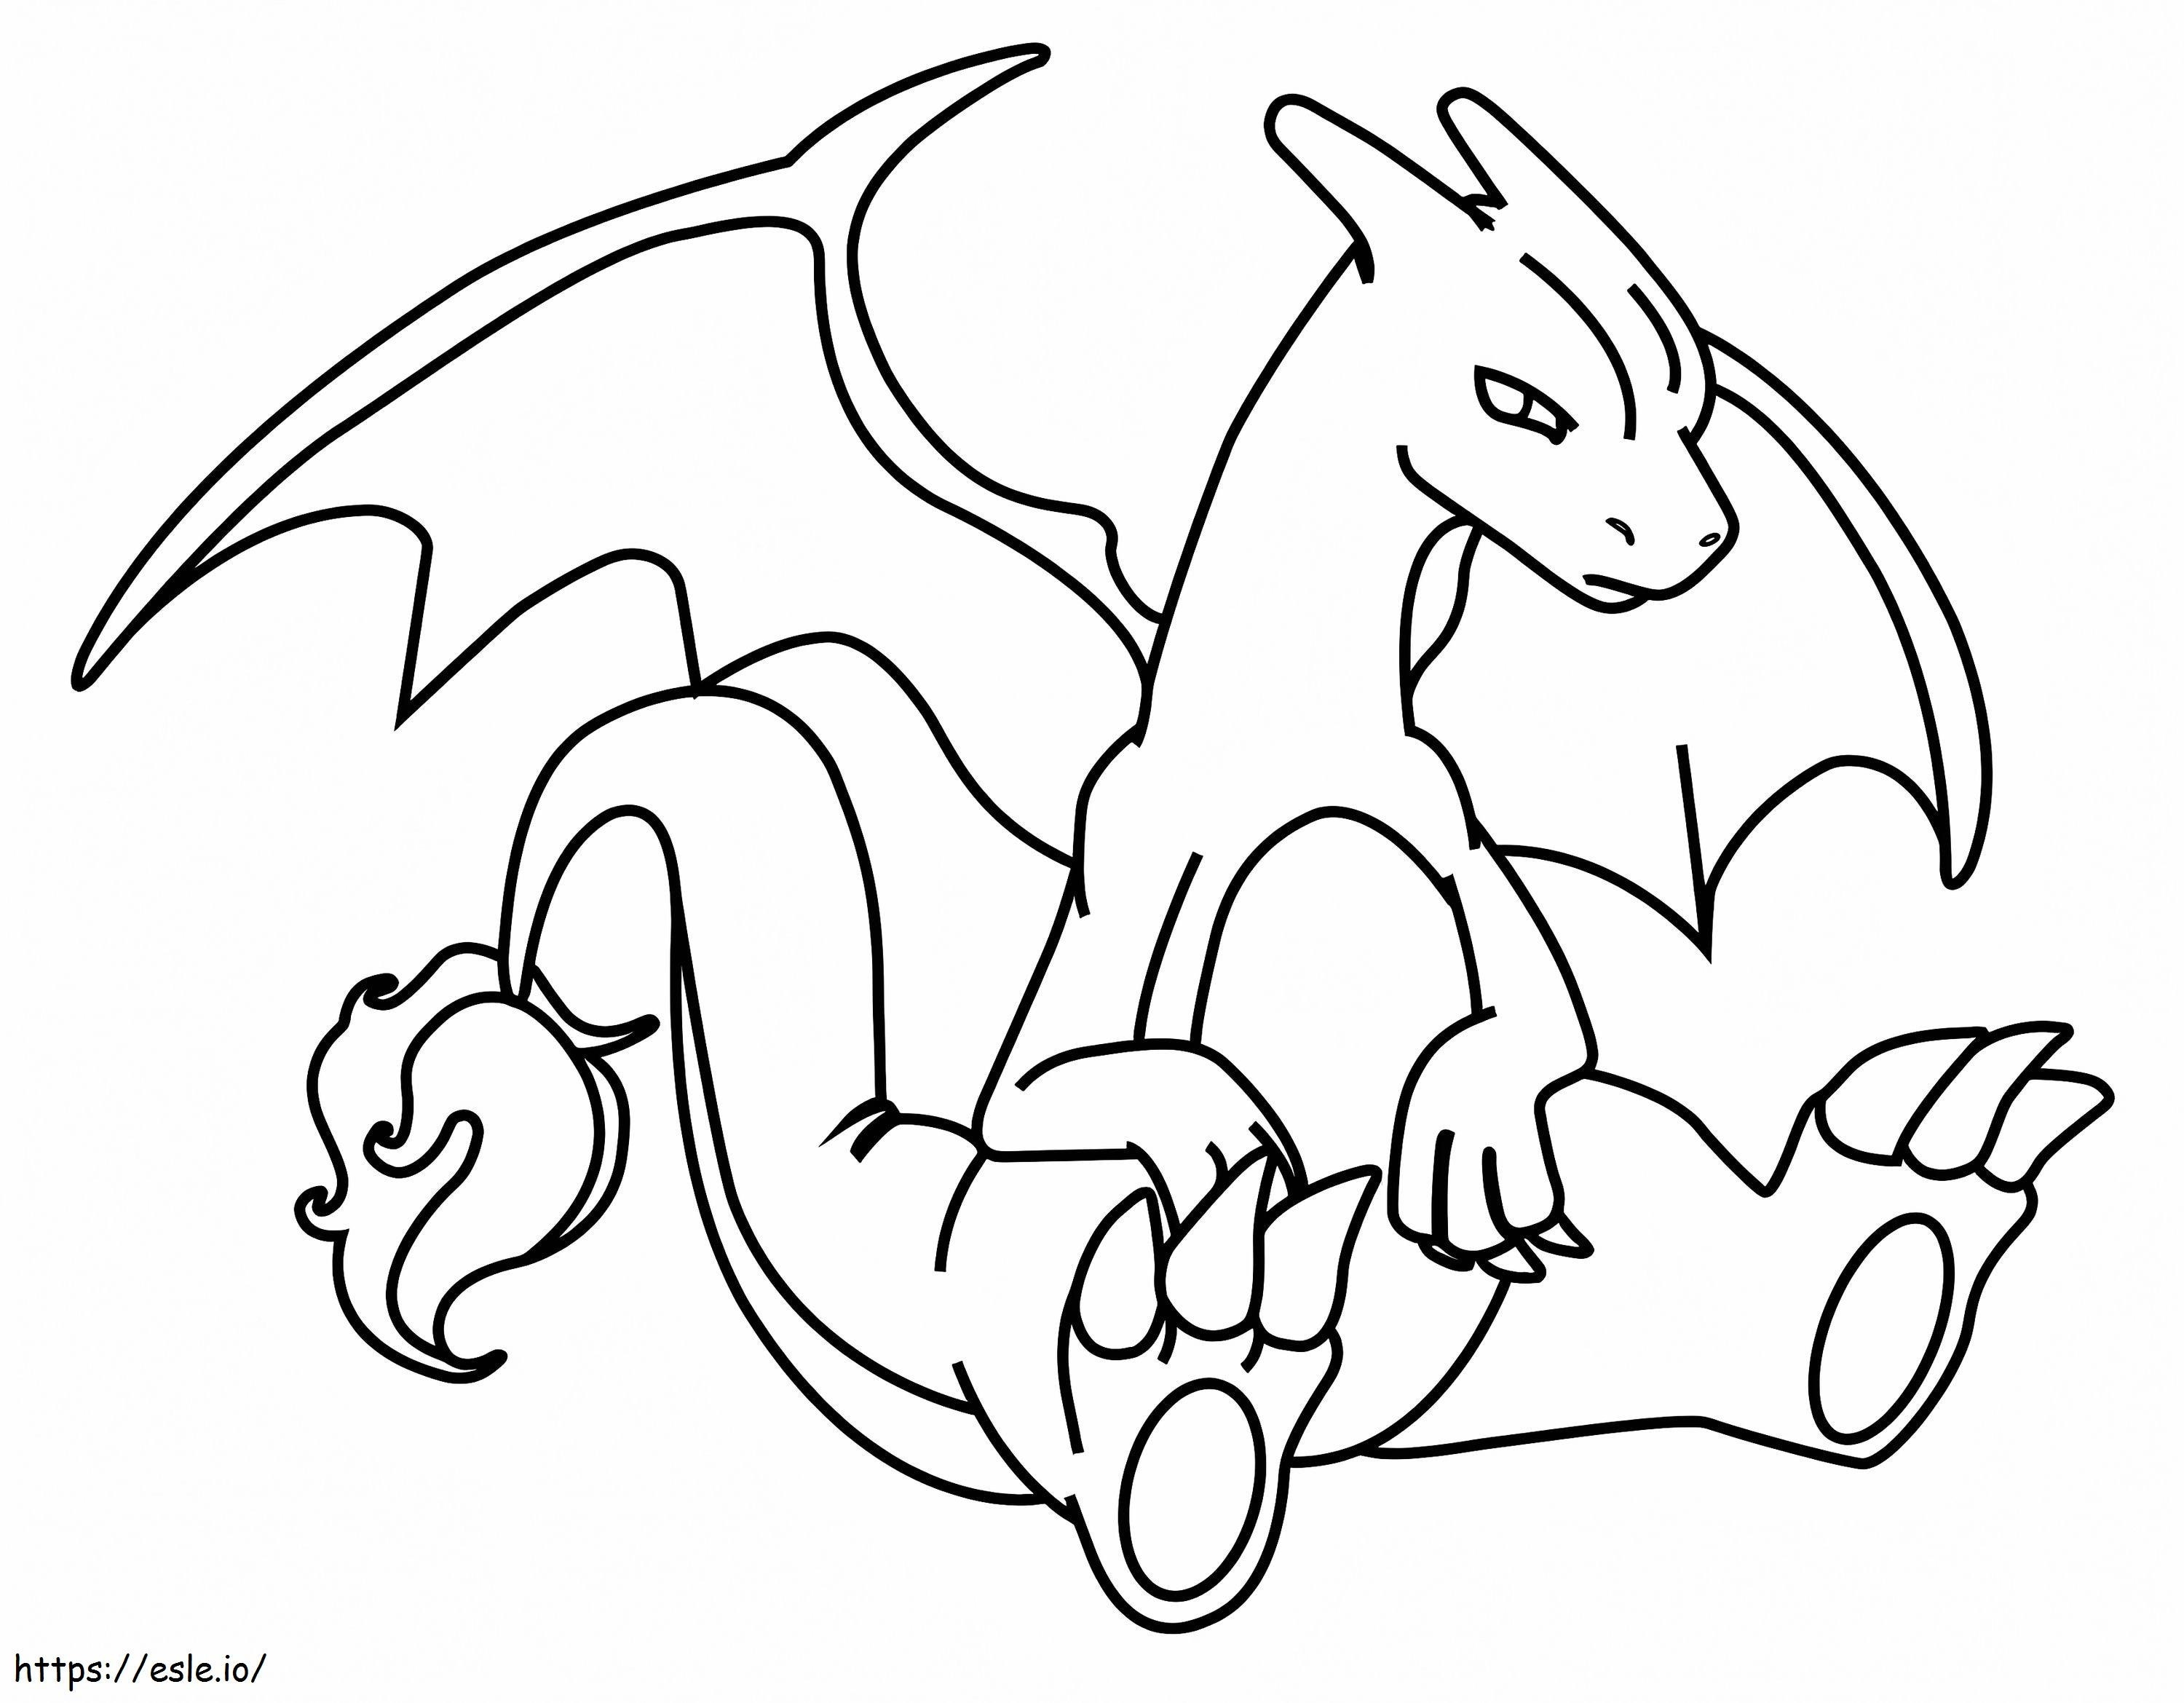 Charizard Is Sad coloring page